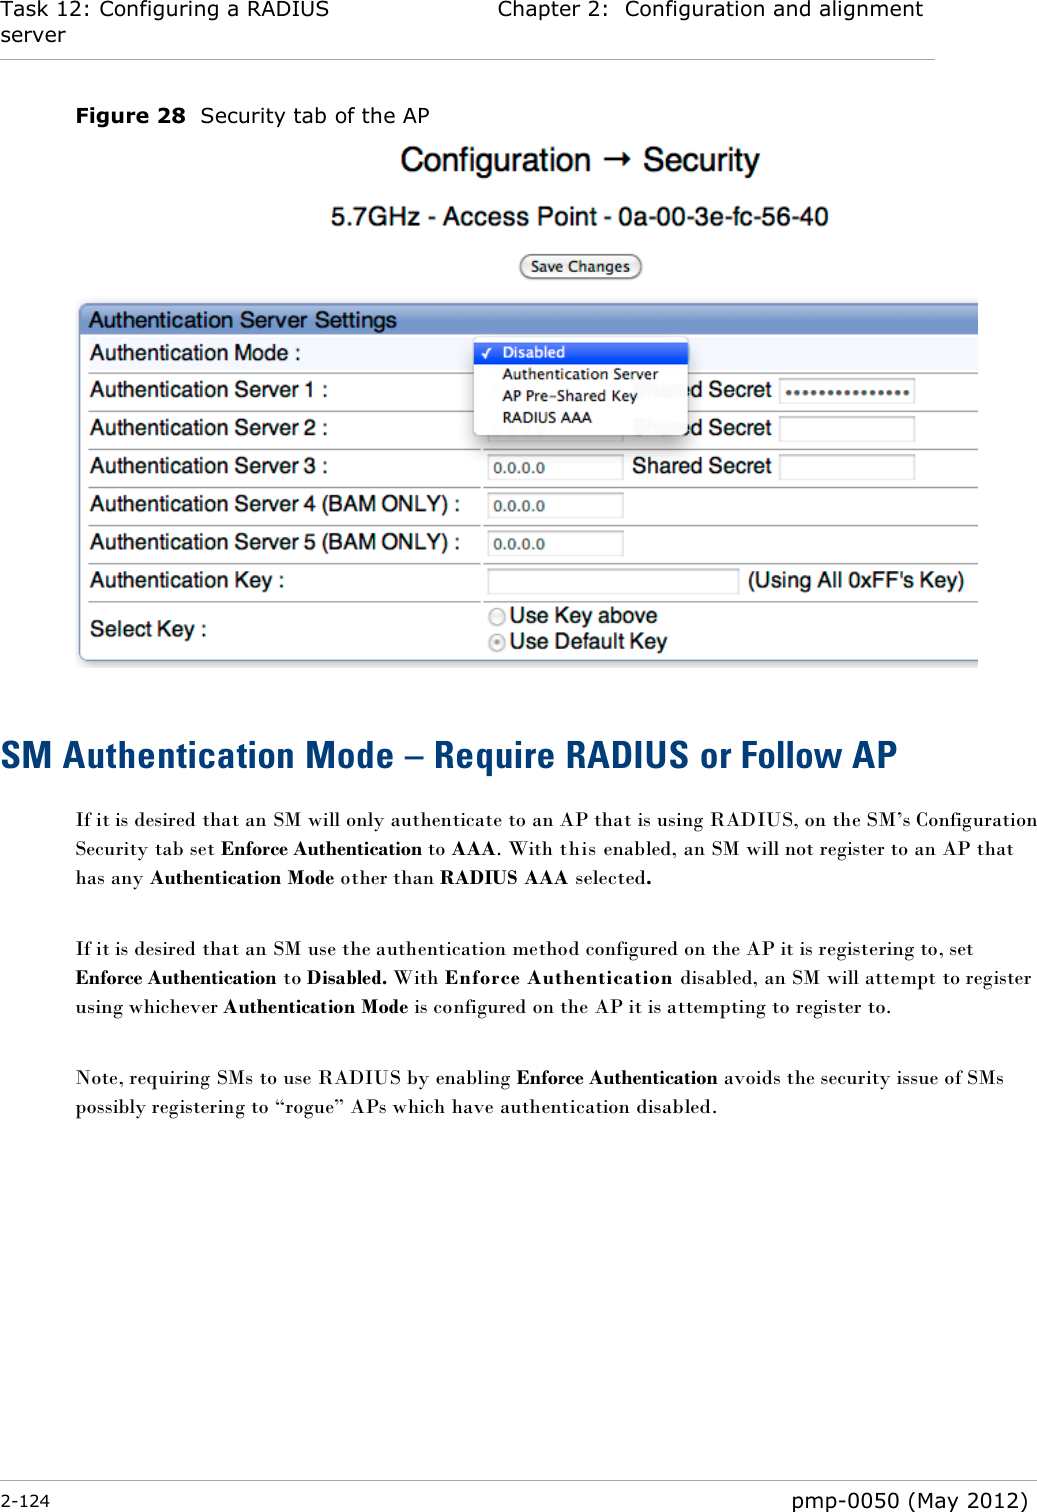 Task 12: Configuring a RADIUS server Chapter 2:  Configuration and alignment  2-124  pmp-0050 (May 2012)  Figure 28  Security tab of the AP   SM Authentication Mode – Require RADIUS or Follow AP If it is desired that an SM will only authenticate to an AP that is using RADIUS, on the SM‘s Configuration Security tab set Enforce Authentication to AAA. With this enabled, an SM will not register to an AP that has any Authentication Mode other than RADIUS AAA selected.  If it is desired that an SM use the authentication method configured on the AP it is registering to, set Enforce Authentication to Disabled. With Enforce Authentication disabled, an SM will attempt to register using whichever Authentication Mode is configured on the AP it is attempting to register to.  Note, requiring SMs to use RADIUS by enabling Enforce Authentication avoids the security issue of SMs possibly registering to ―rogue‖ APs which have authentication disabled.  